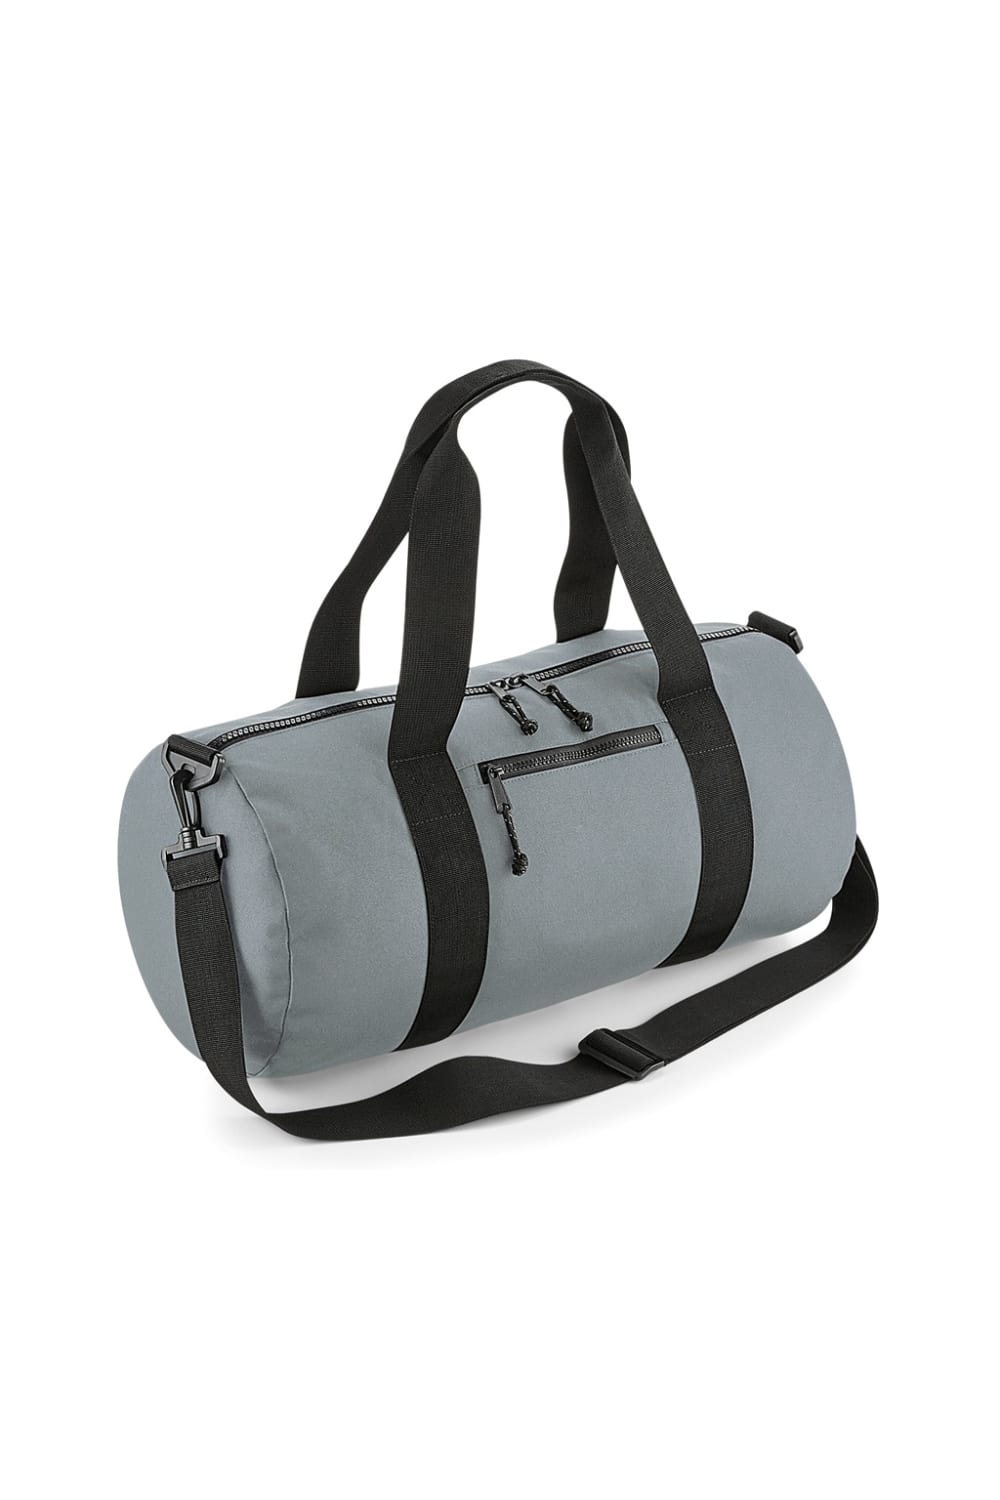 agBase Recycled Barrel Bag - Pure Gray